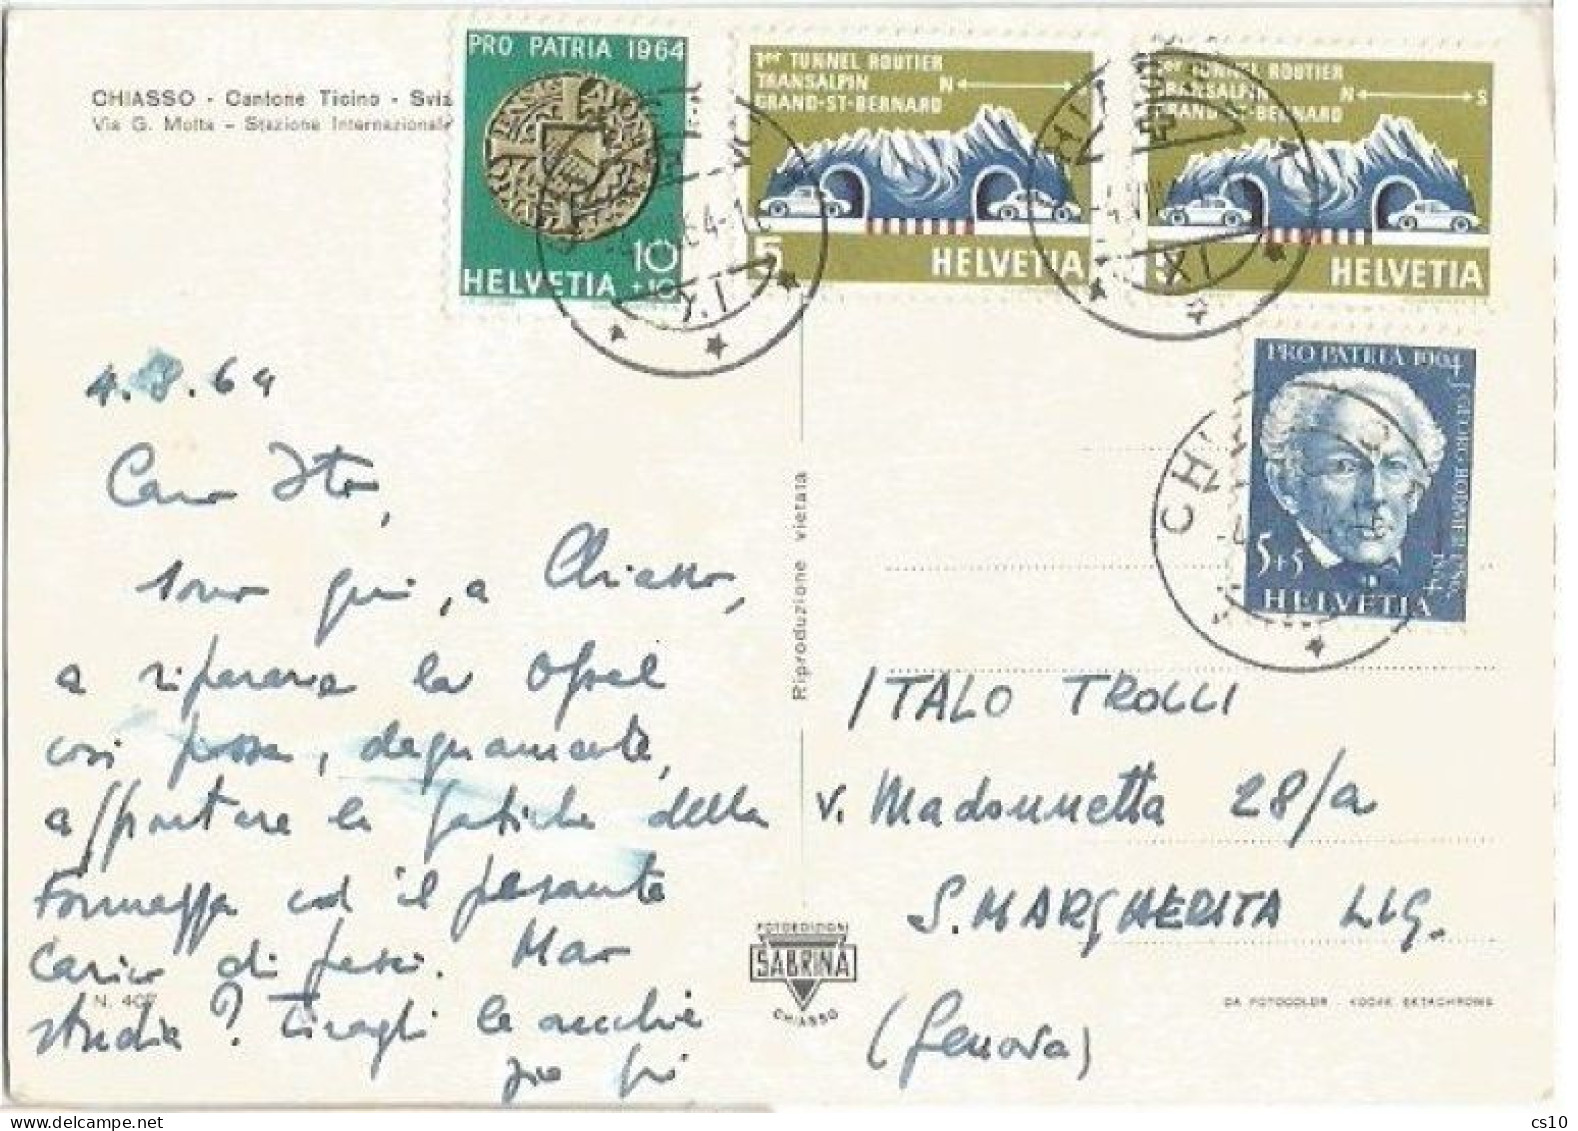 Suisse Nice Twin Values ( C.5 + C.5 + C.5 + Other ) Franking Pcard 1964 To Italy - Marcophilie